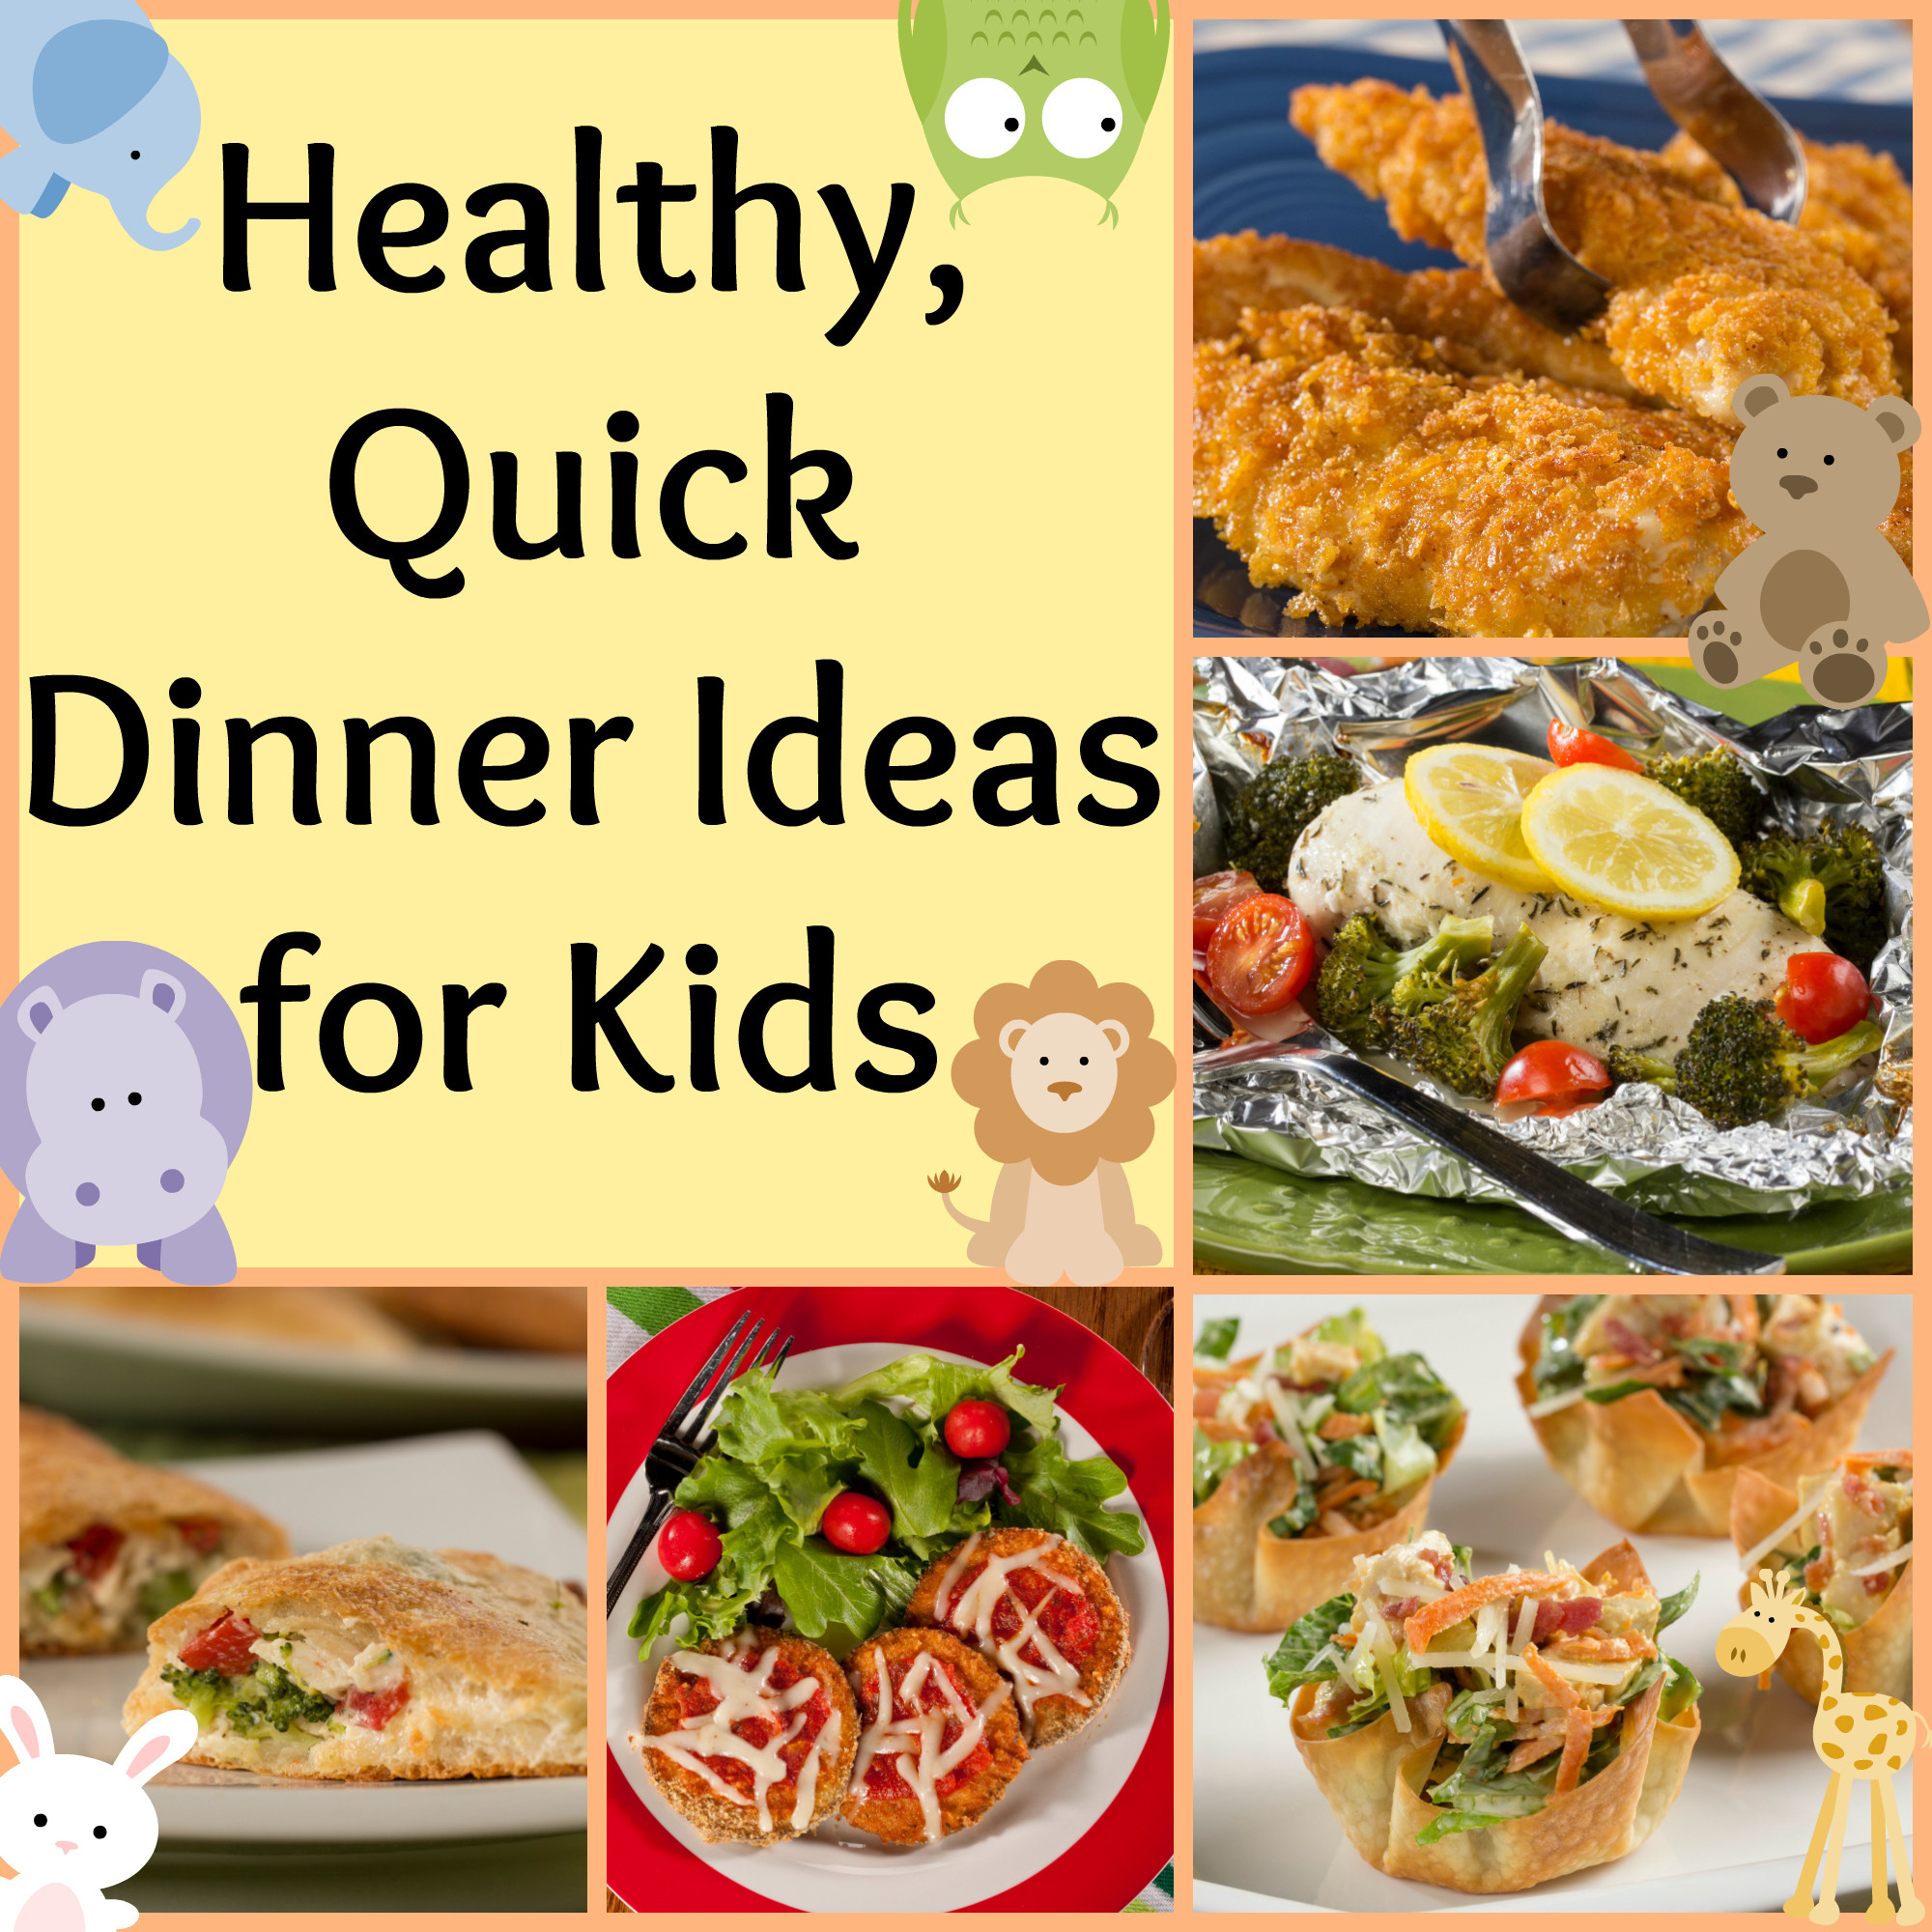 Easy Healthy Dinners For Kids
 Healthy Quick Dinner Ideas for Kids Mr Food s Blog